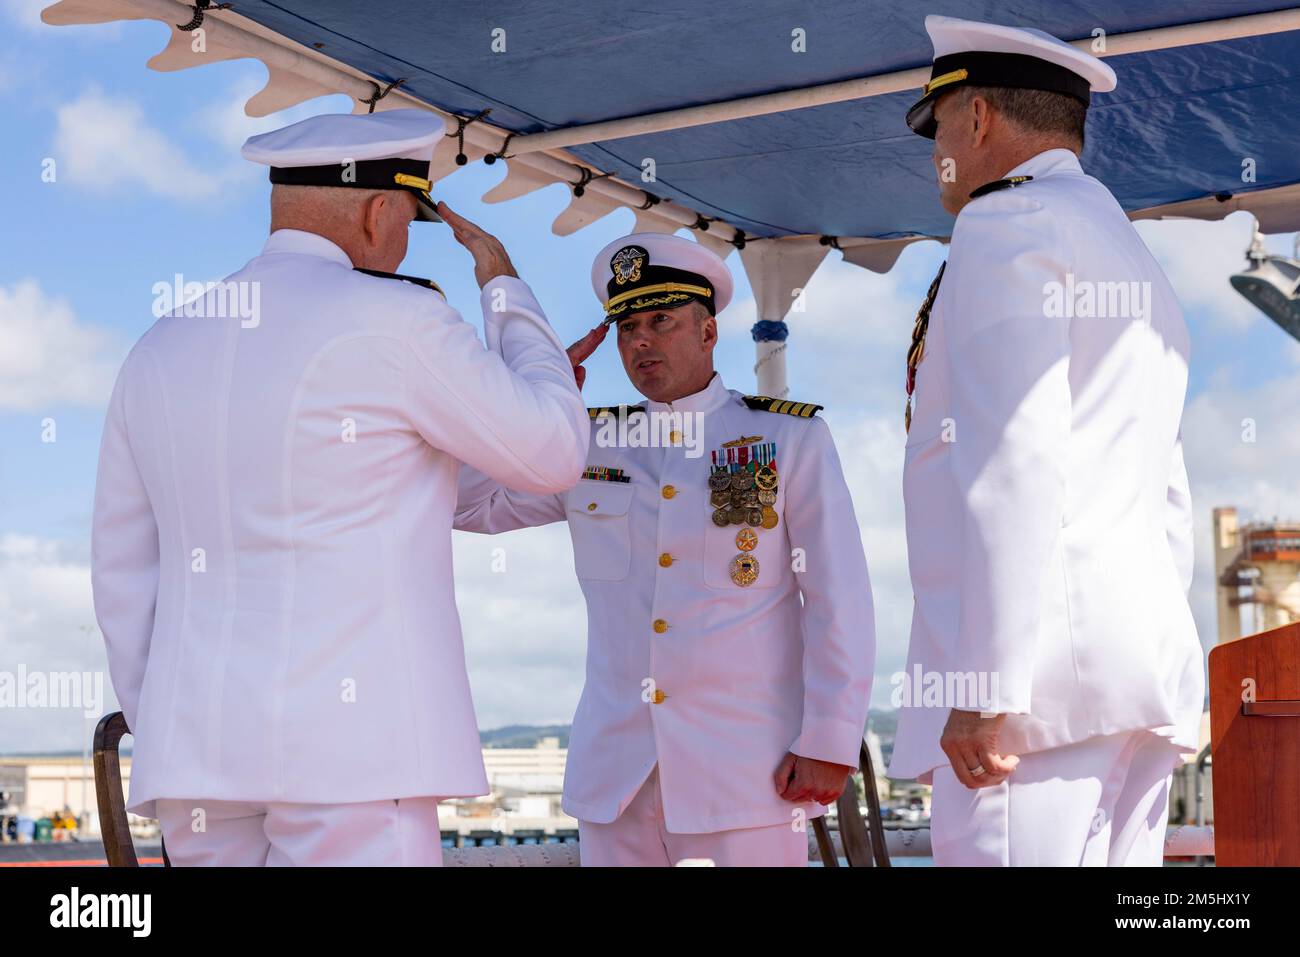 220318-N-OT701-1095 JOINT BASE PEARL HARBOR-HICKAM (Mar. 18, 2021) Capt. Don Rauch salutes Rear Adm. Timothy Kott, Commander, Naval Surface Group Middle Pacific, as he assumes command during a change of command ceremony. Capt. Ken Athans was relieved by Rauch as Commander, Destroyer Squadron 31 during the ceremony. Stock Photo